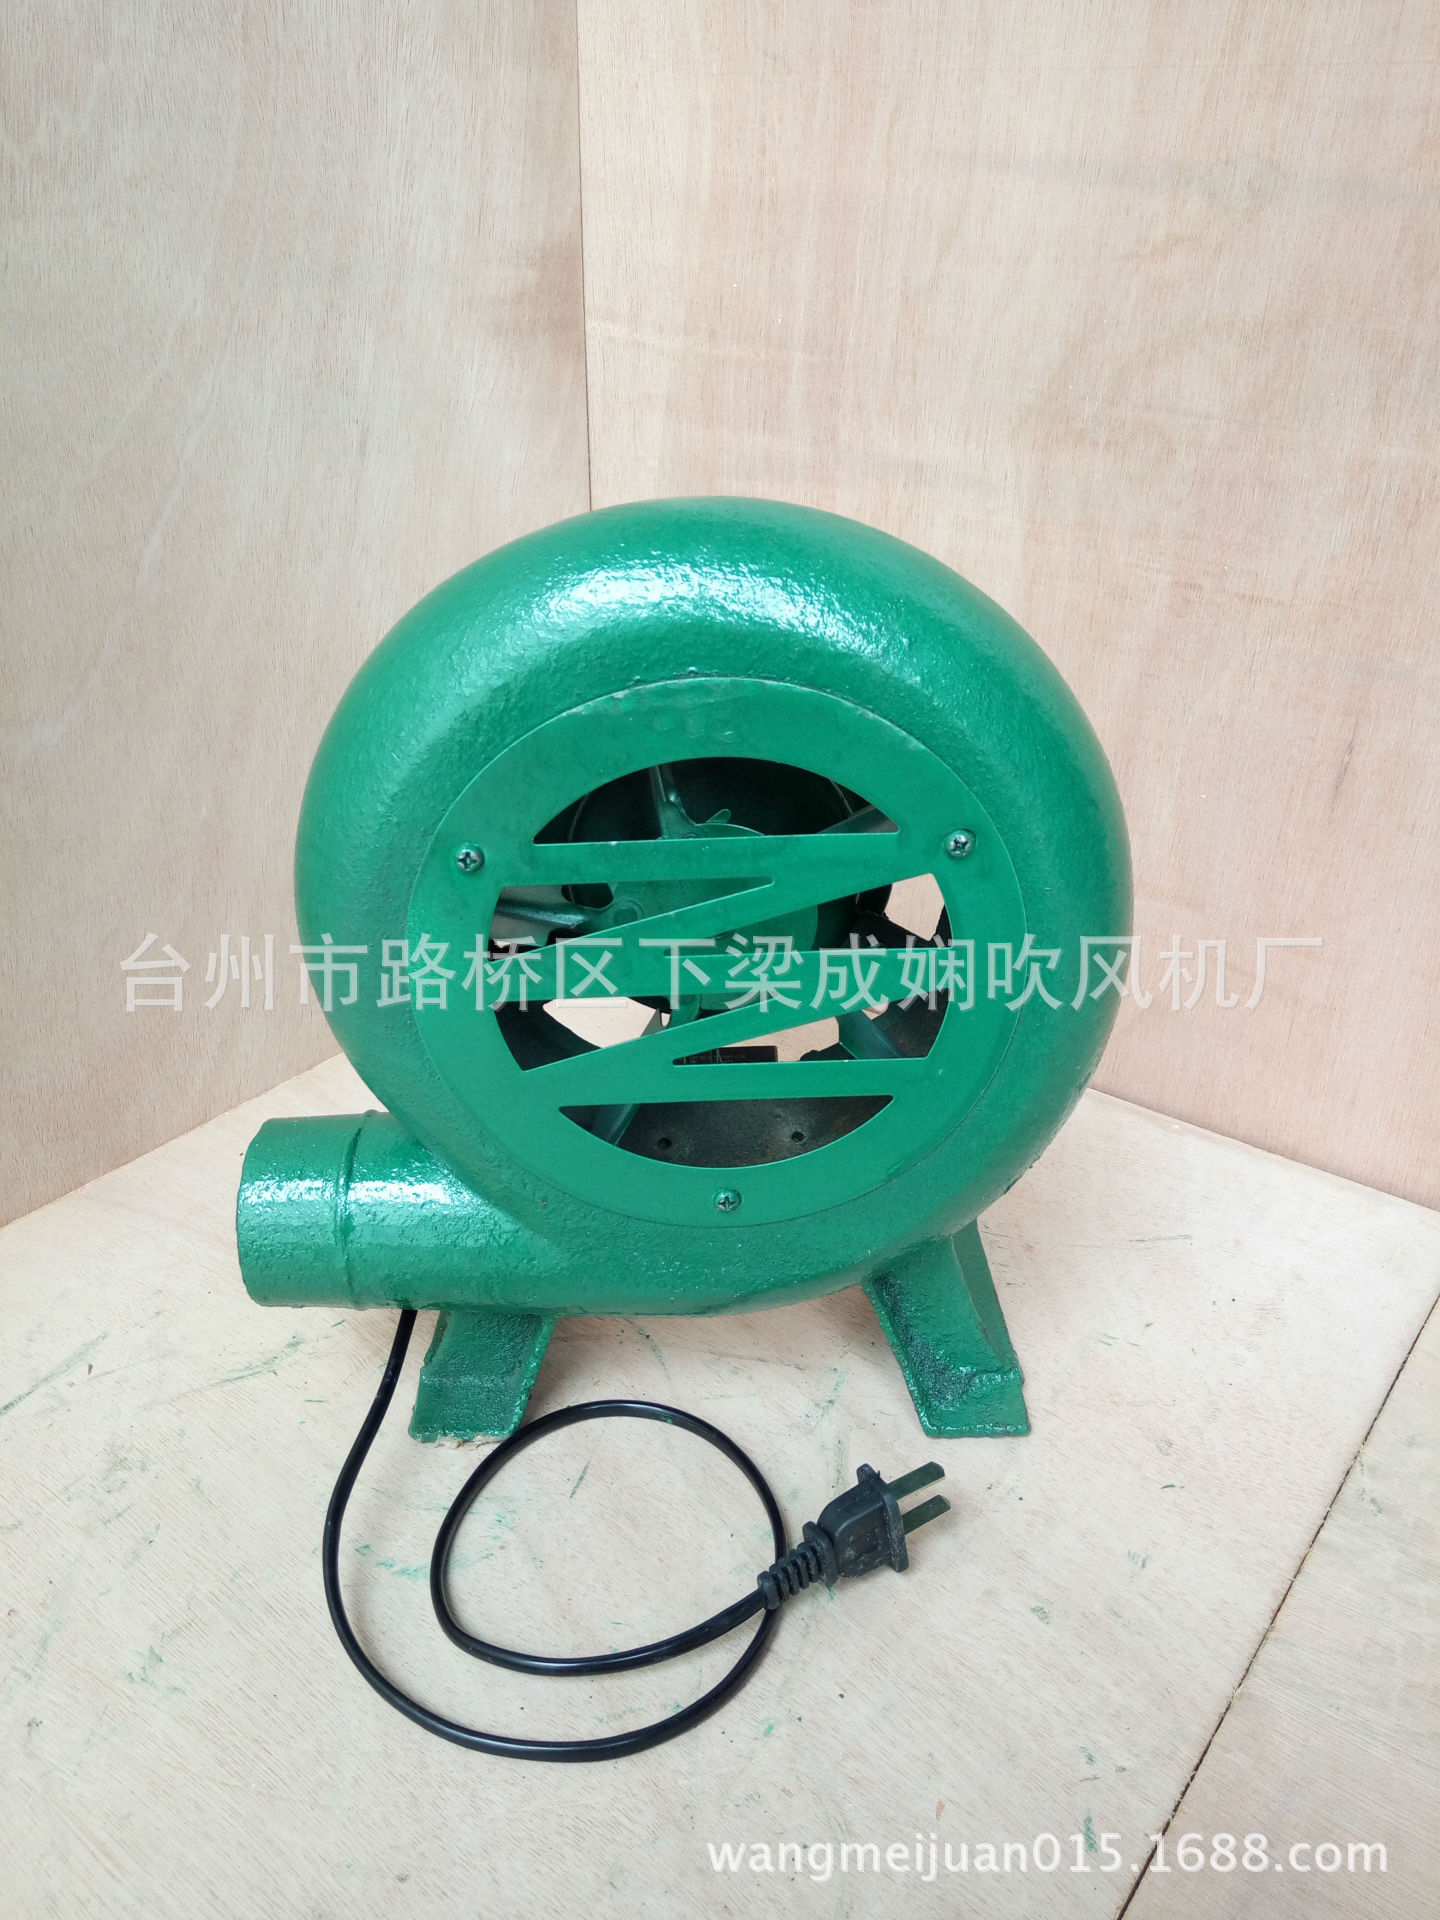 direct deal| 100W cast iron Blower Low noise blower|Centrifugal fan|Blower small-scale